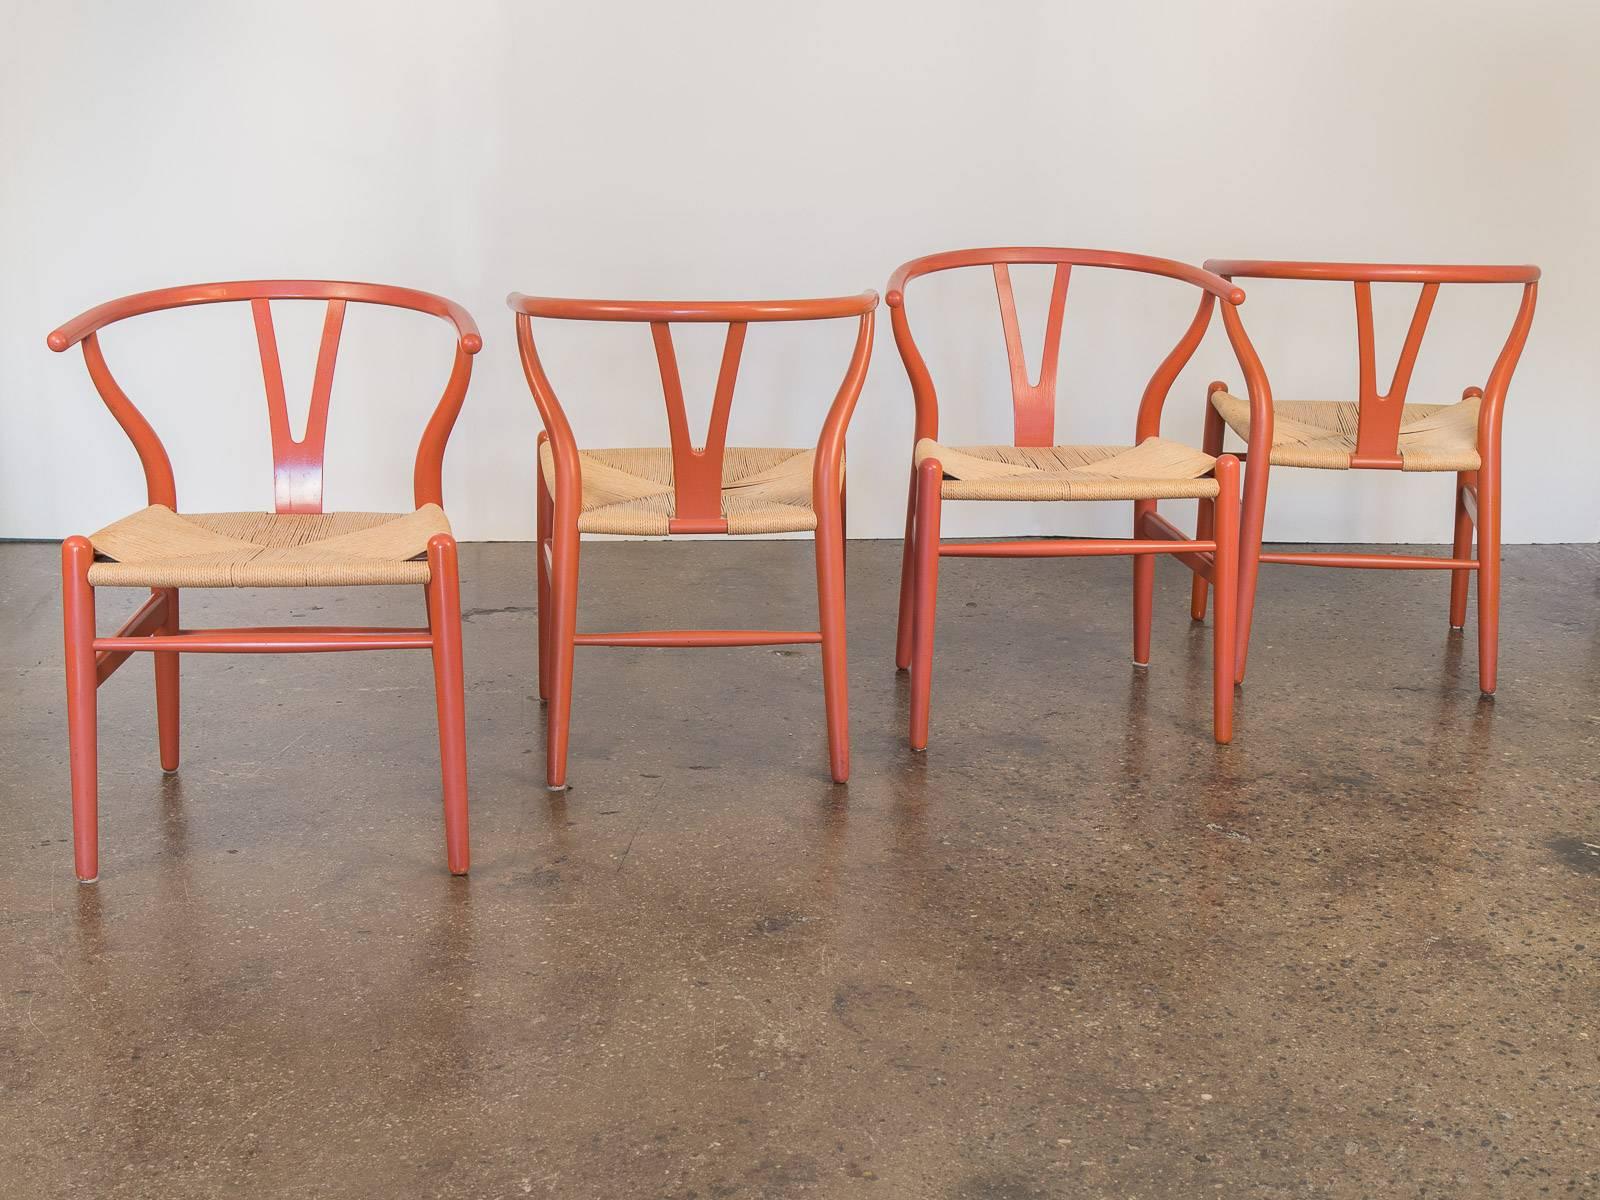 Set of four Hans J. Wegner Wishbone Chairs for Carl Hansen & Son. First designed in 1949, these four wishbone chairs—also known as the CH24 chairs—retain their original salmon color finish. The wishbone “Y” shaped backing and rounded arm rests